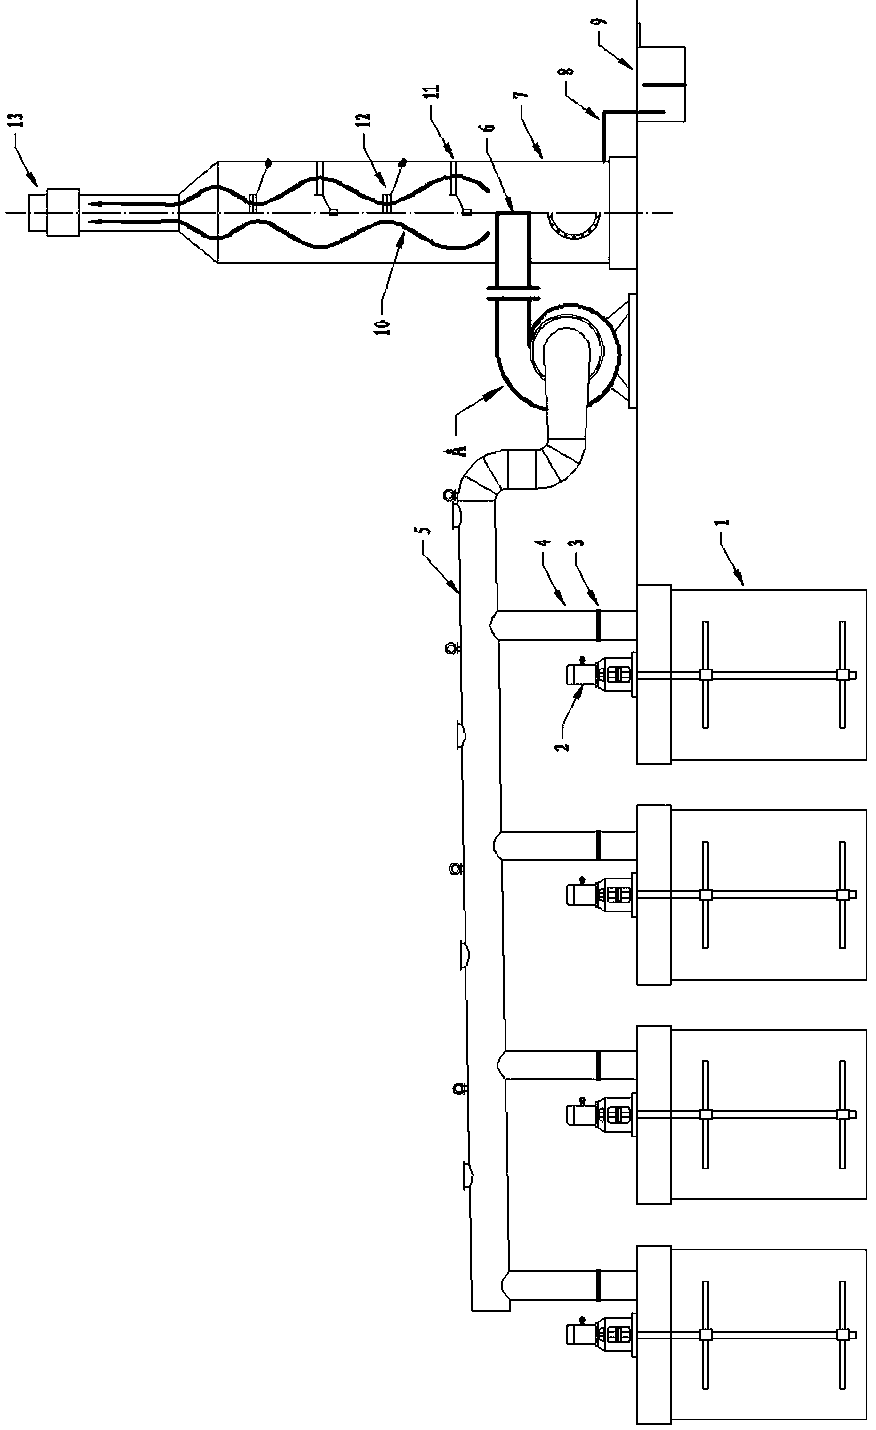 A compound pumping system for the reaction of manganese ore powder and sulfuric acid